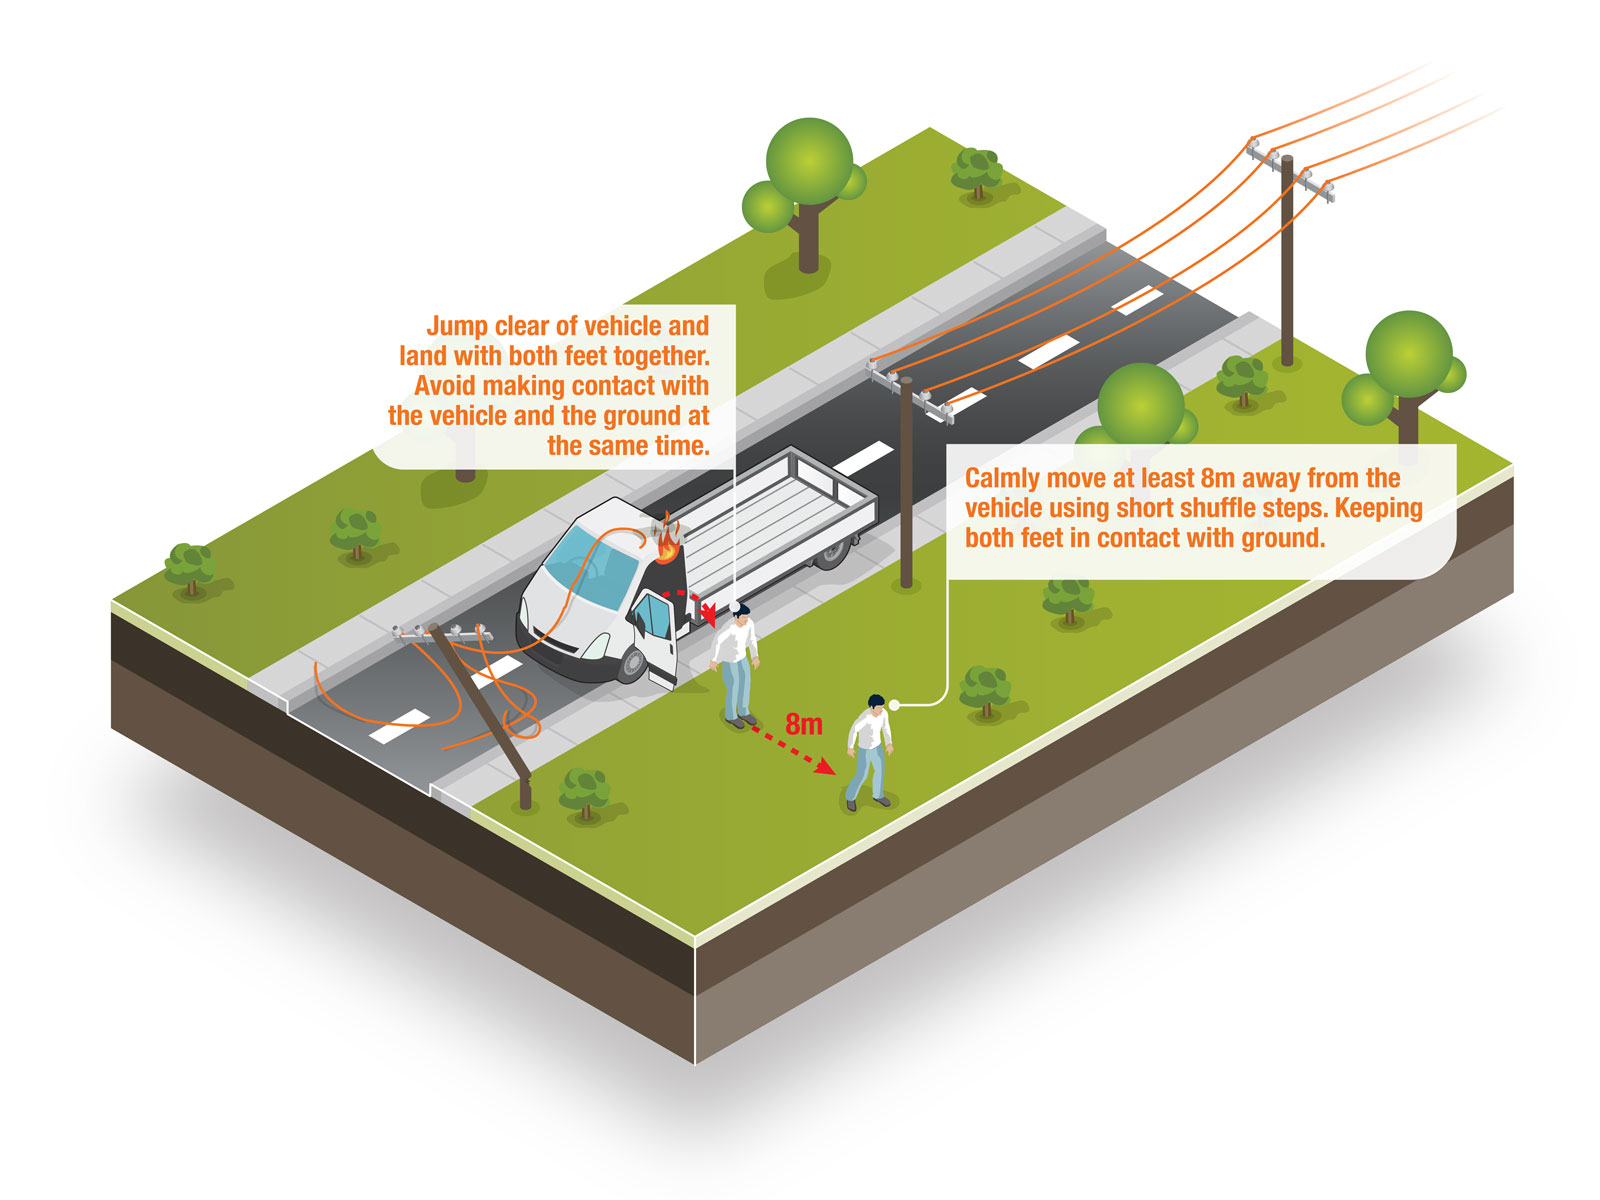 exiting vehicle while a power line has come down technical illustration